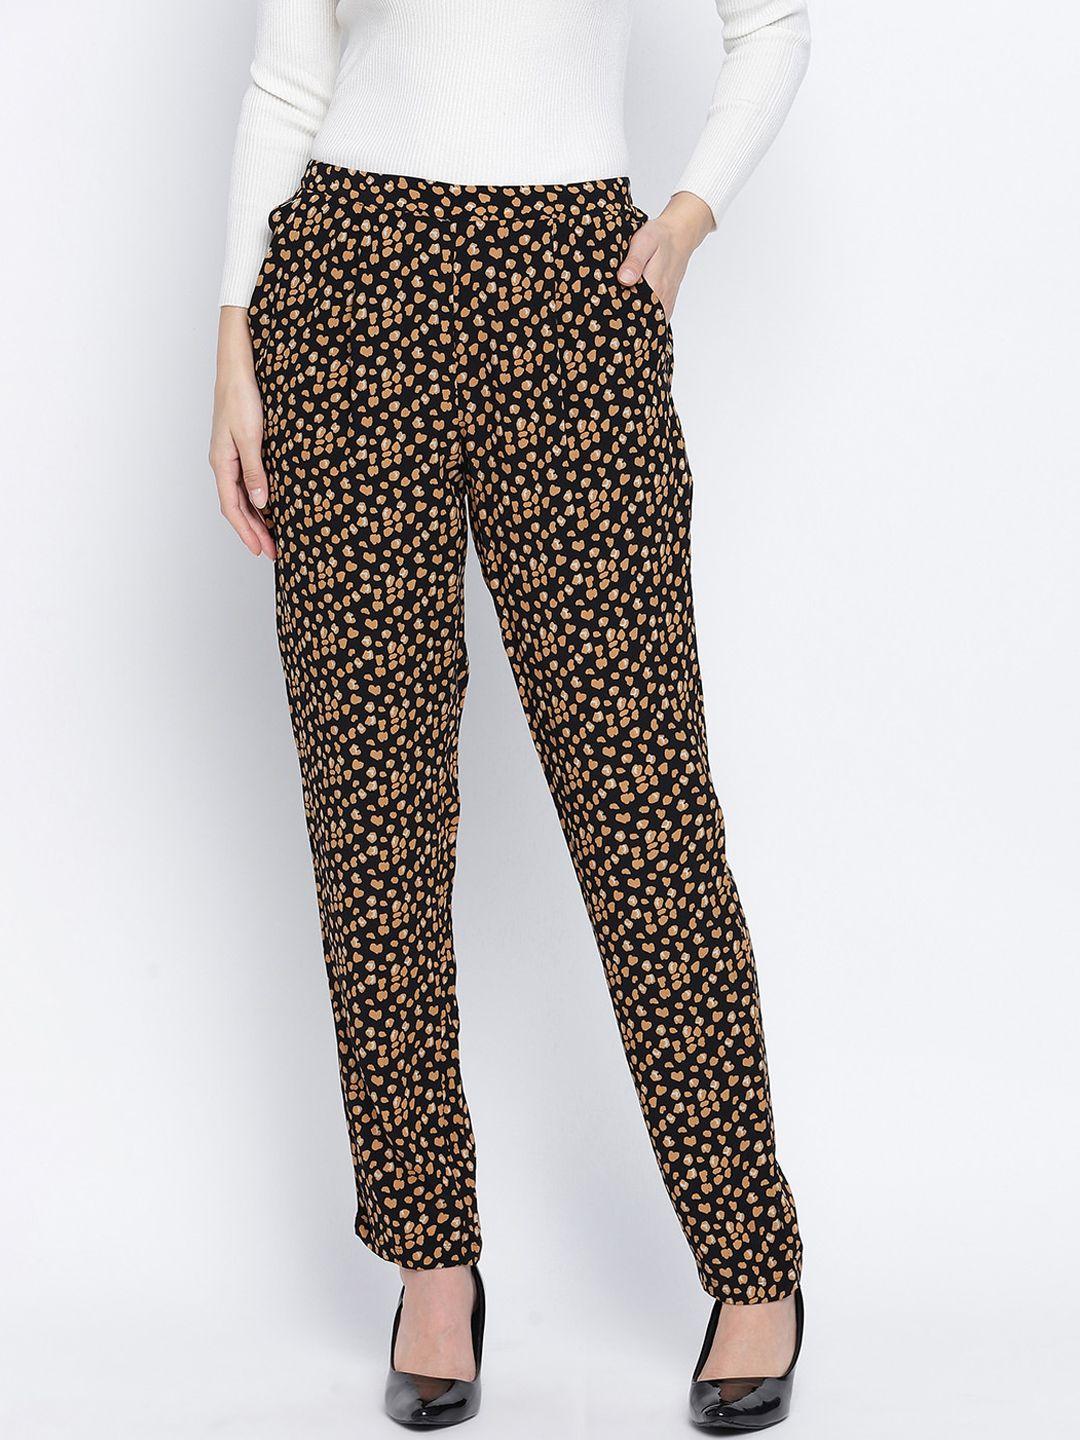 oxolloxo women brown printed trousers